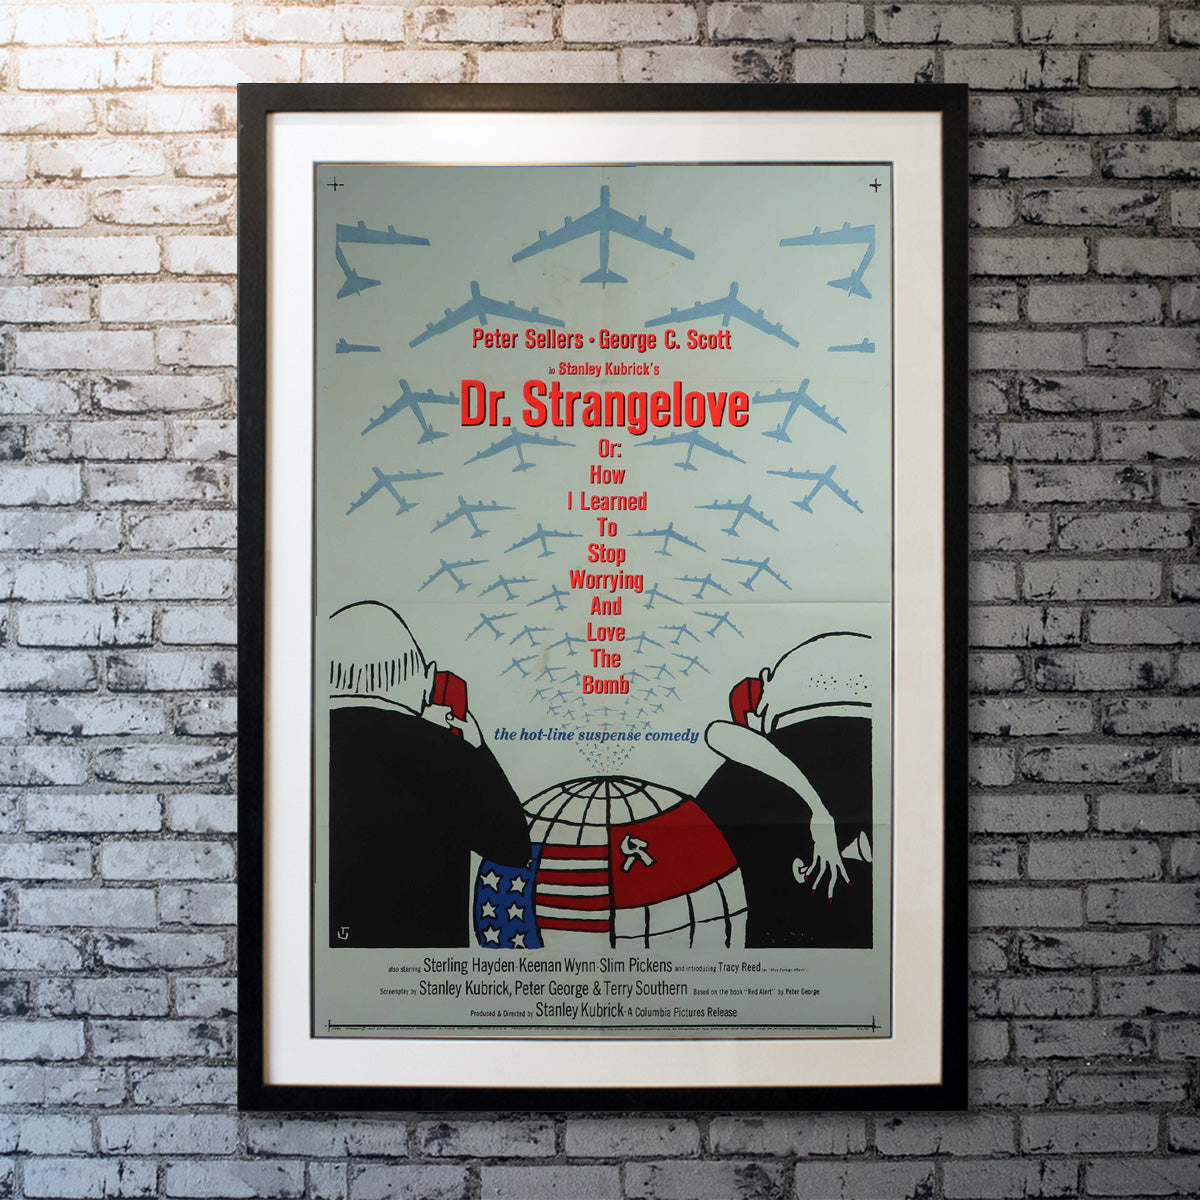 Dr. Strangelove or: How I Learned To Stop Worrying And Love The Bomb (1964)